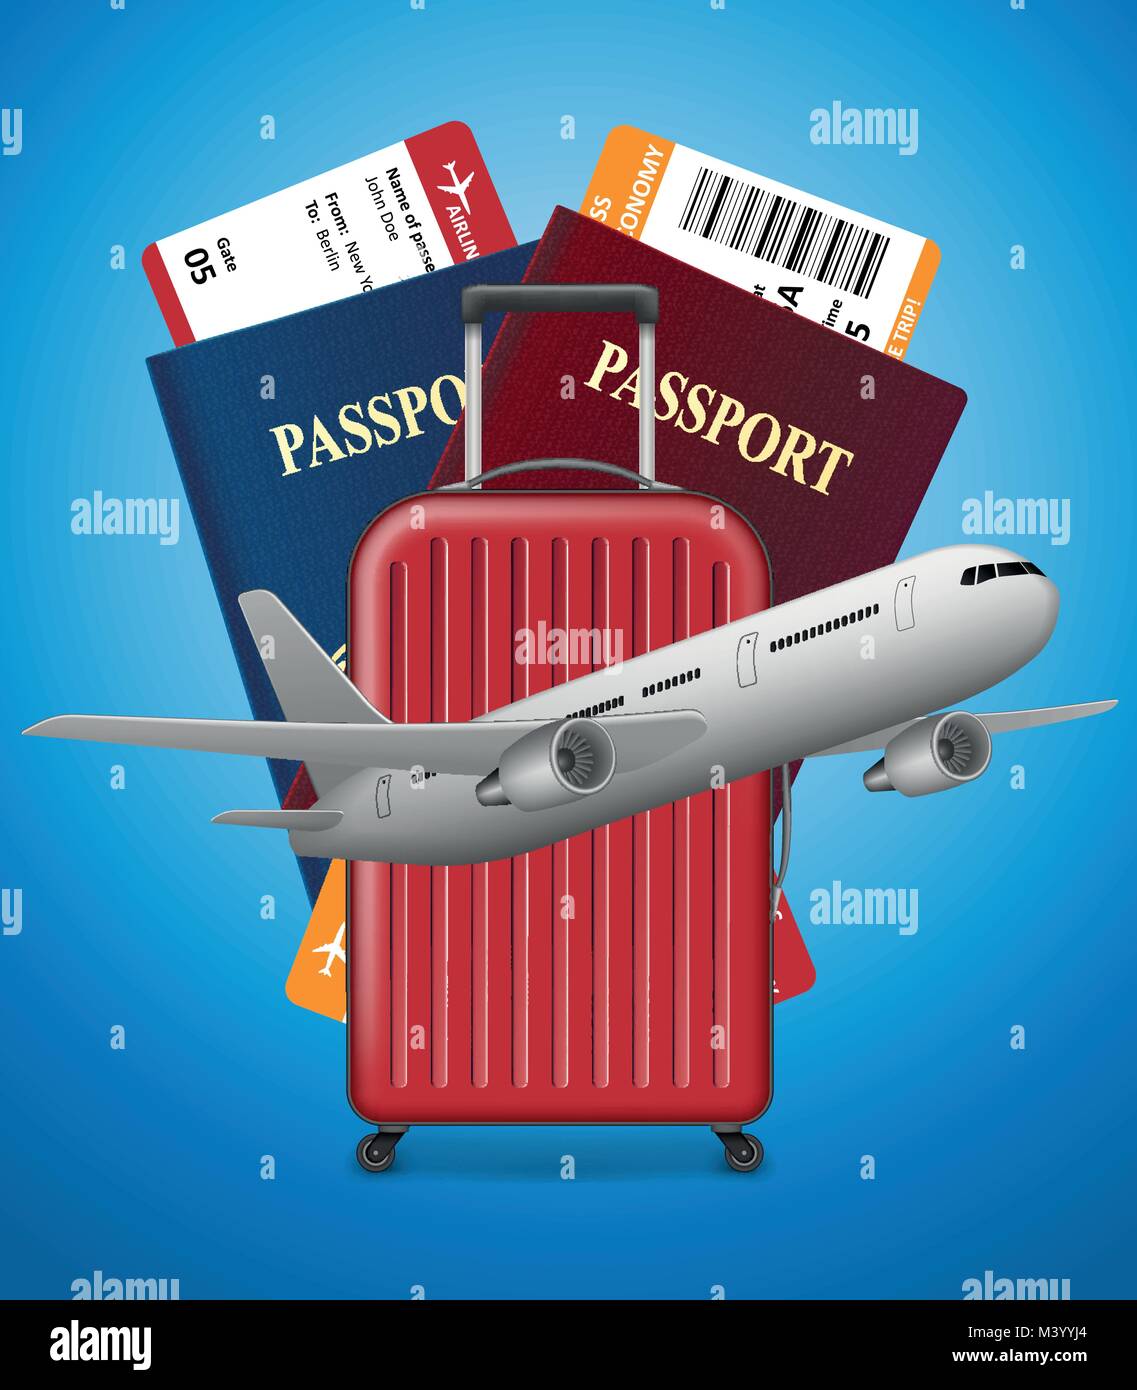 Business trip banner with Passport, tickets, airplane and suitcase on blue background. International Air travel concept. Business travel vector illustration. Stock Vector